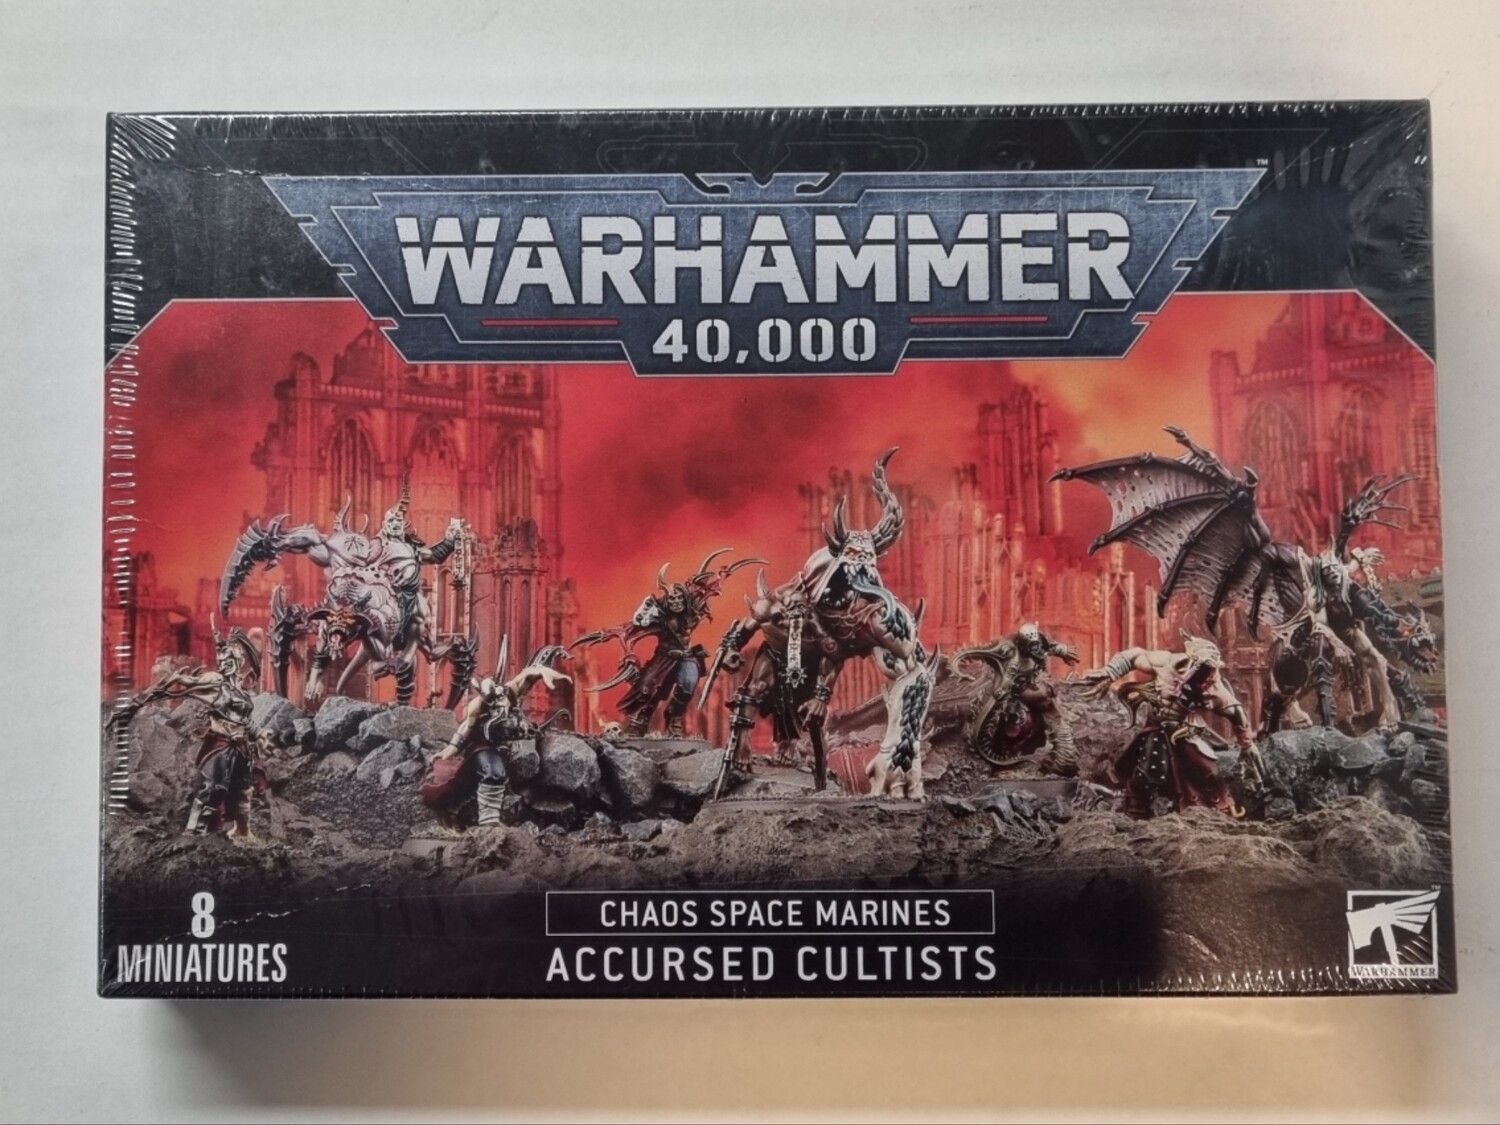 Warhammer, 40k, 43-83, Chaos Space Marines: Accursed Cultists